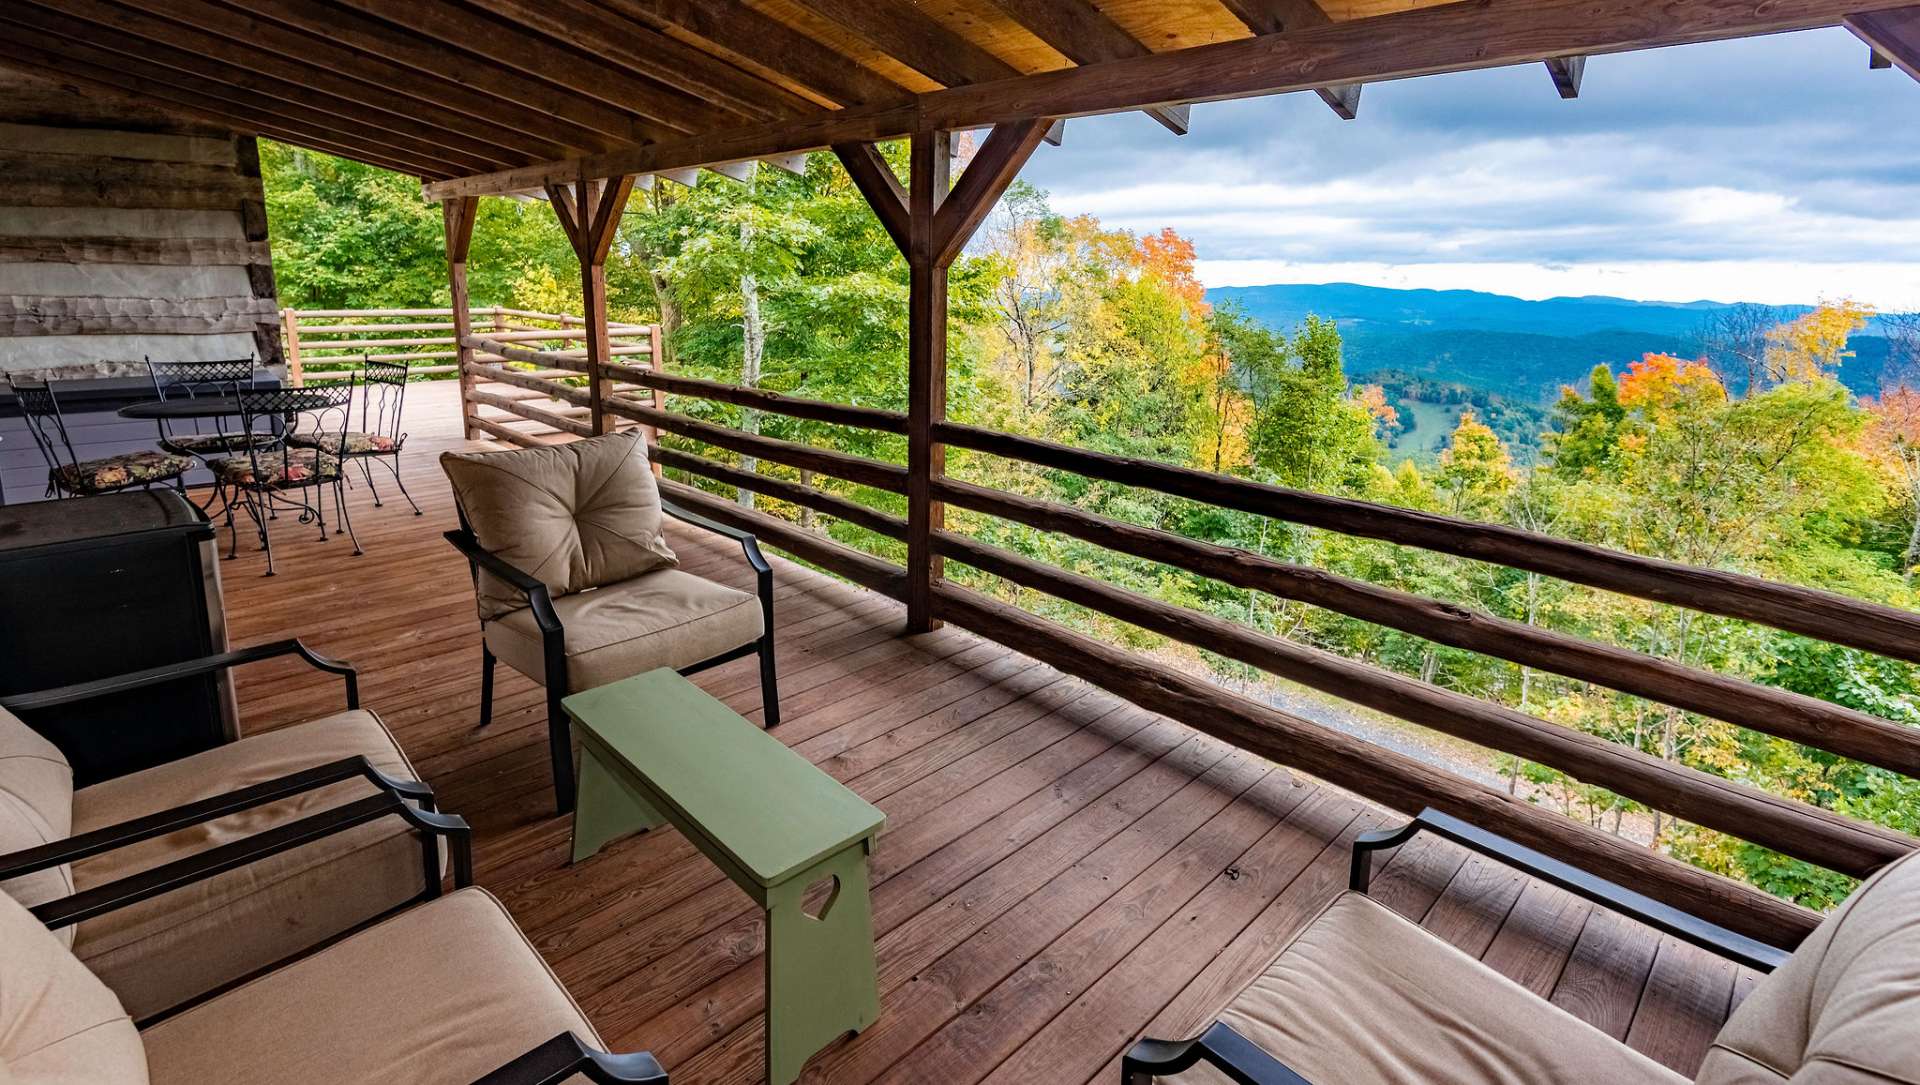 You will love spending time on any of the expansive decks enjoying the views or entertaining friends and family.